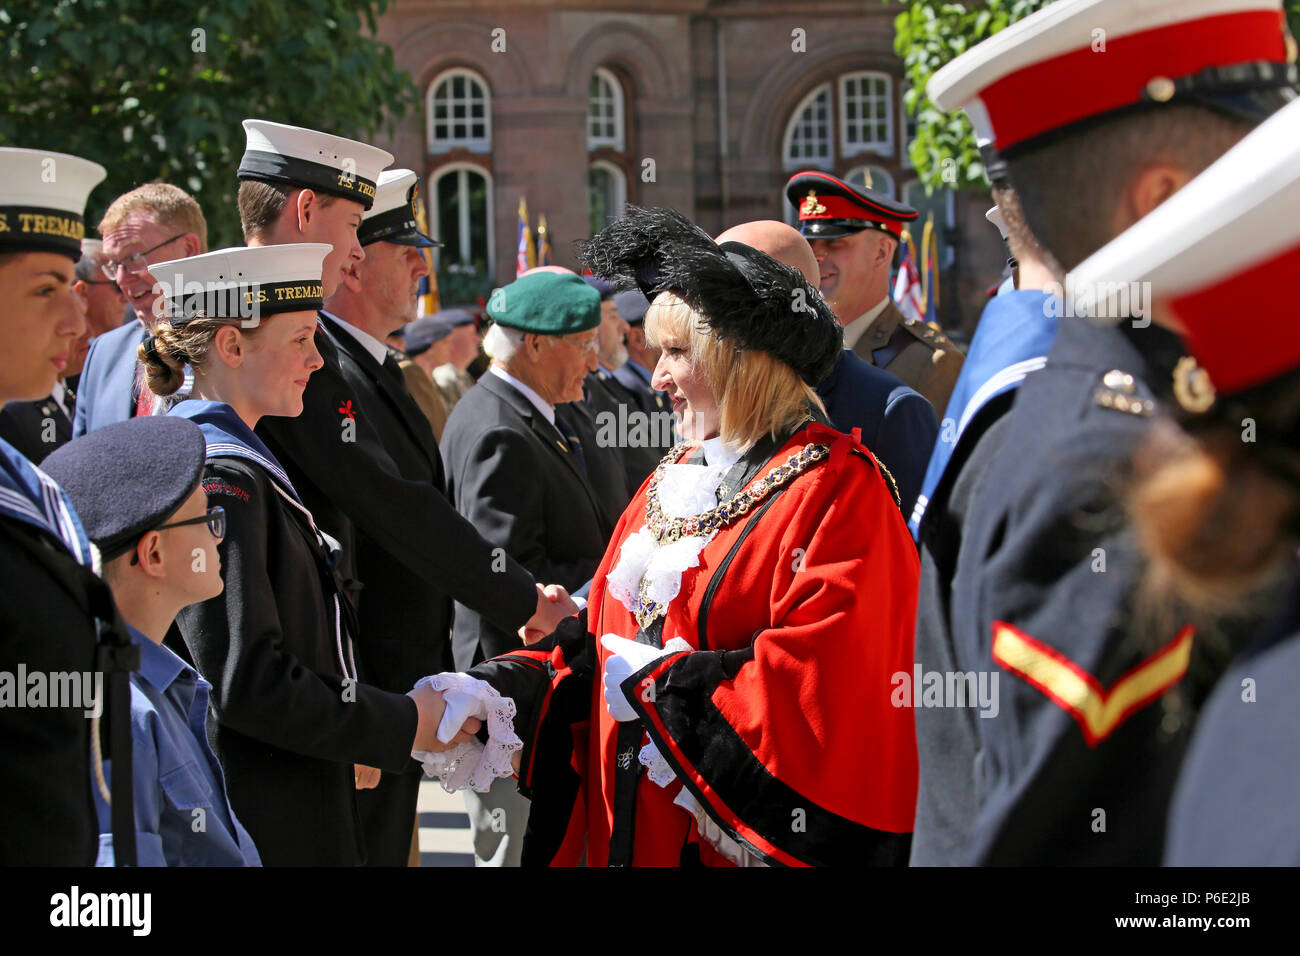 Manchester, UK, 30 June 2018. The Lord Mayor meeting cadets during celebrations of Armed Forces Day where the public are given the opportunity to meet members of the armed forces and talk to them about the work they do, St Peters Square, Manchester, 30th June, 2018 (C)Barbara Cook/Alamy Live News Stock Photo